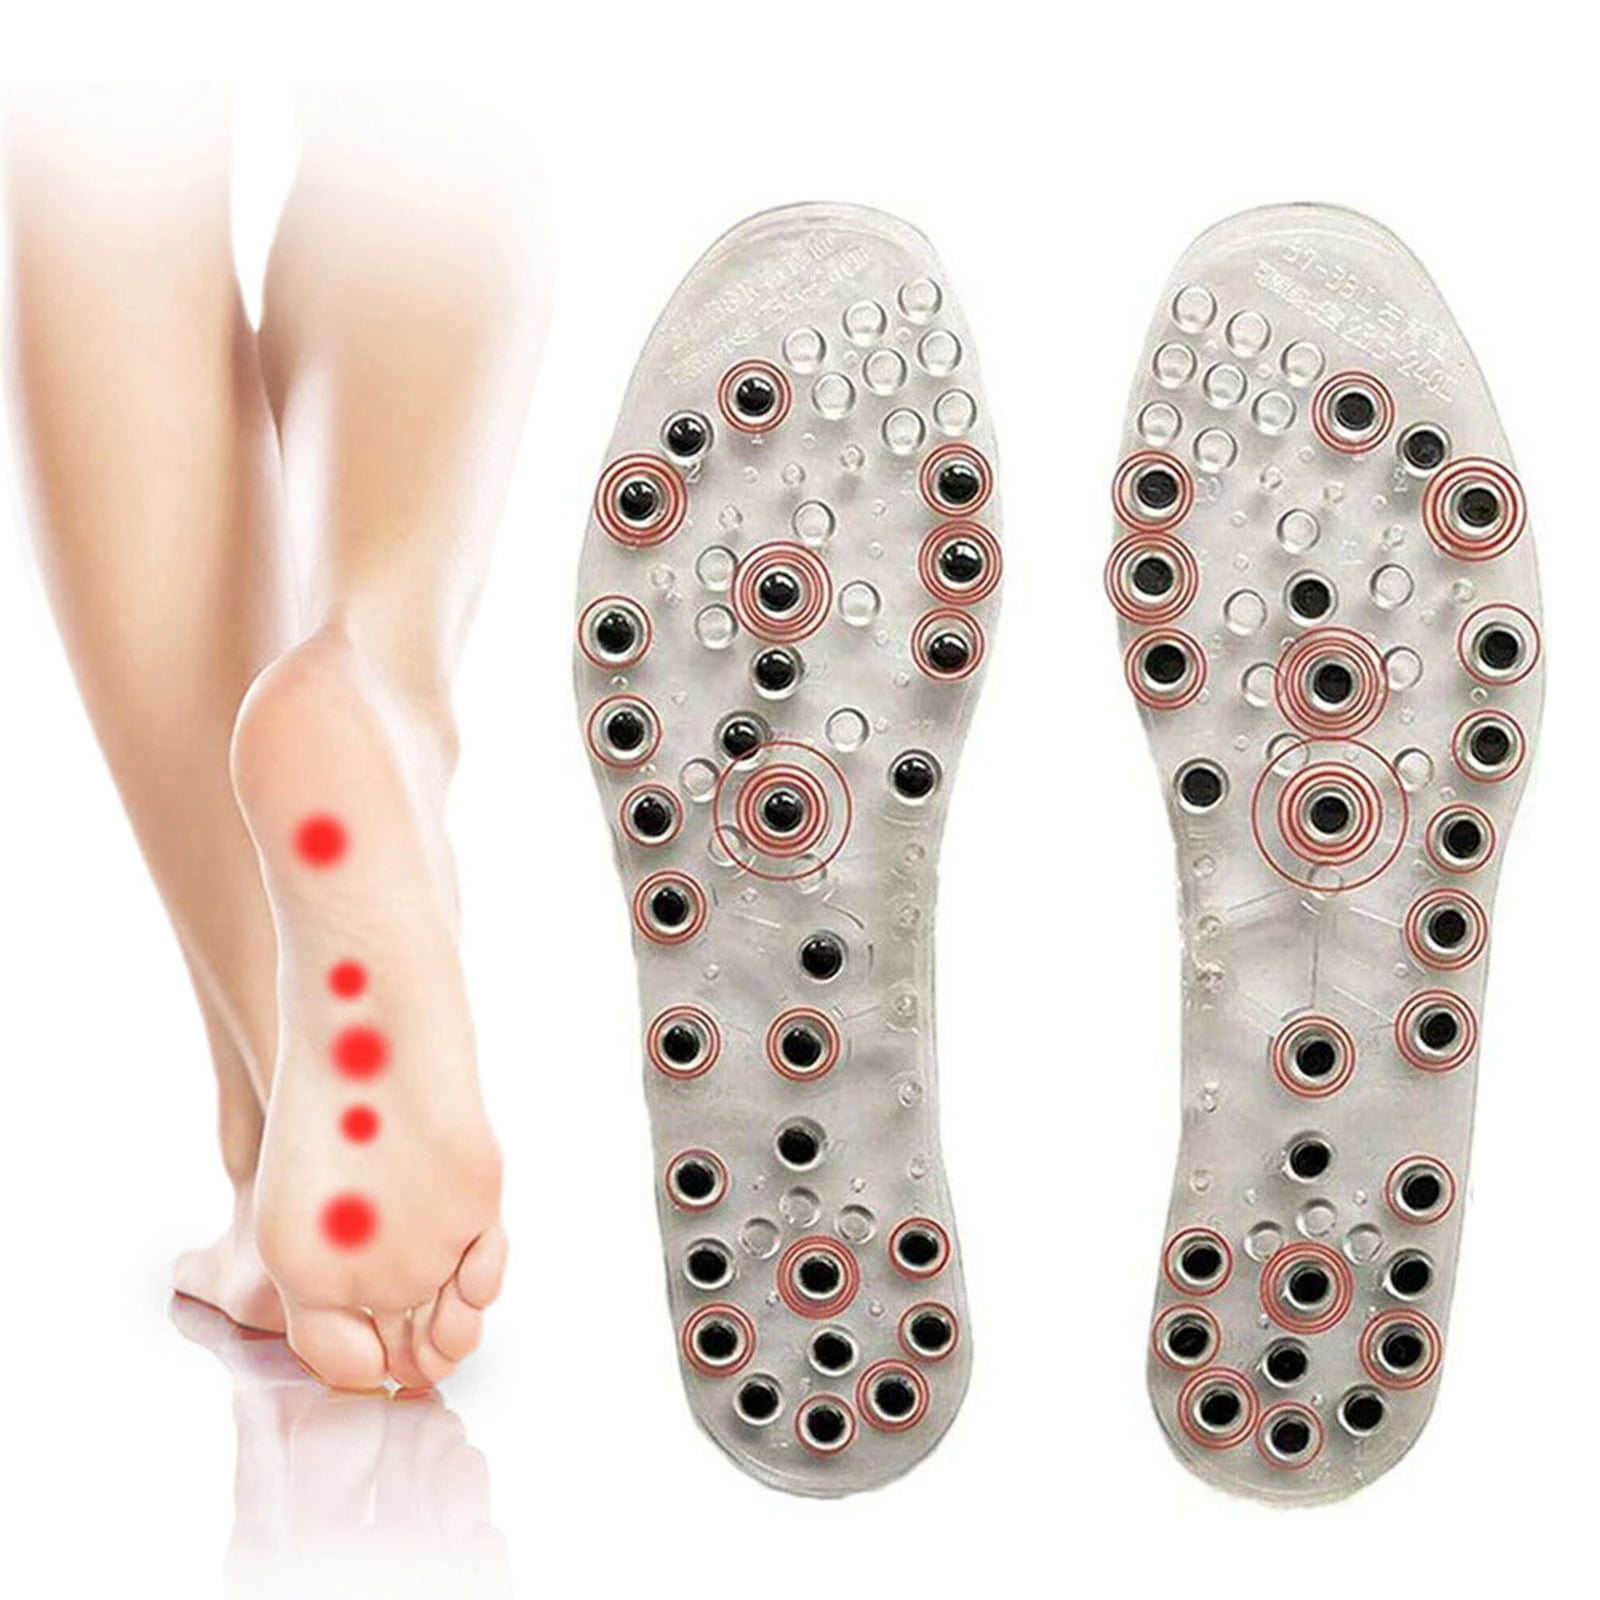 Feet Pain Relieve for Men Women,1 Pair Health Foot Acupressure Slimming Shoe Boots Gel Pads for Muscles Relax Blood Circulation Magnetic Therapy Massage Insole Plantar Fasciitis 